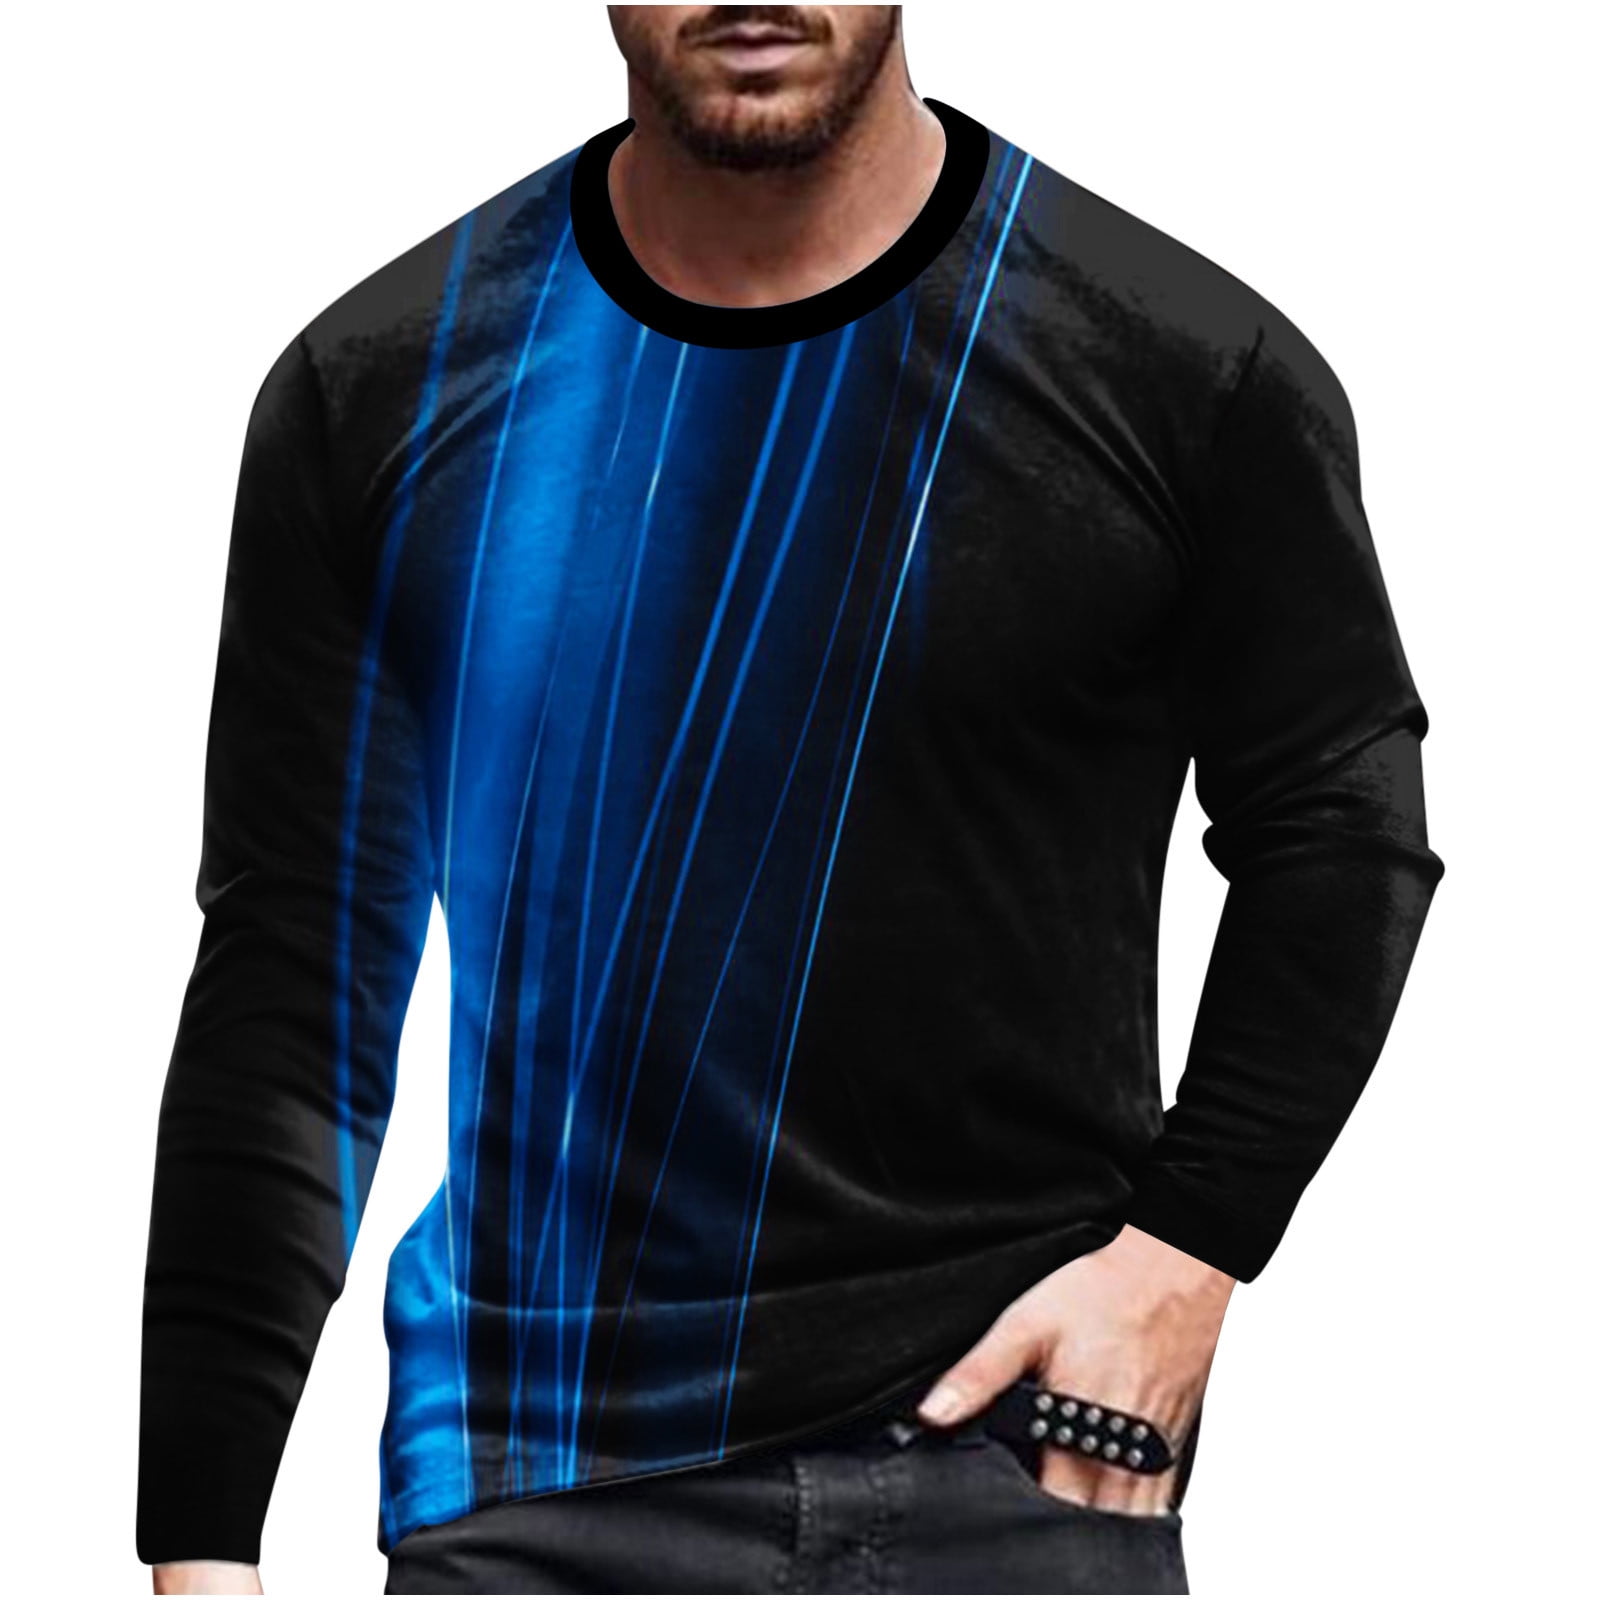 Plus Colorful Sleeve Size Blouses(2#-Blue,4XL) Shirt Printed Neck T Sports Tops Round Shirt Mens Long Fall Casual 3D YYDGH Pullover